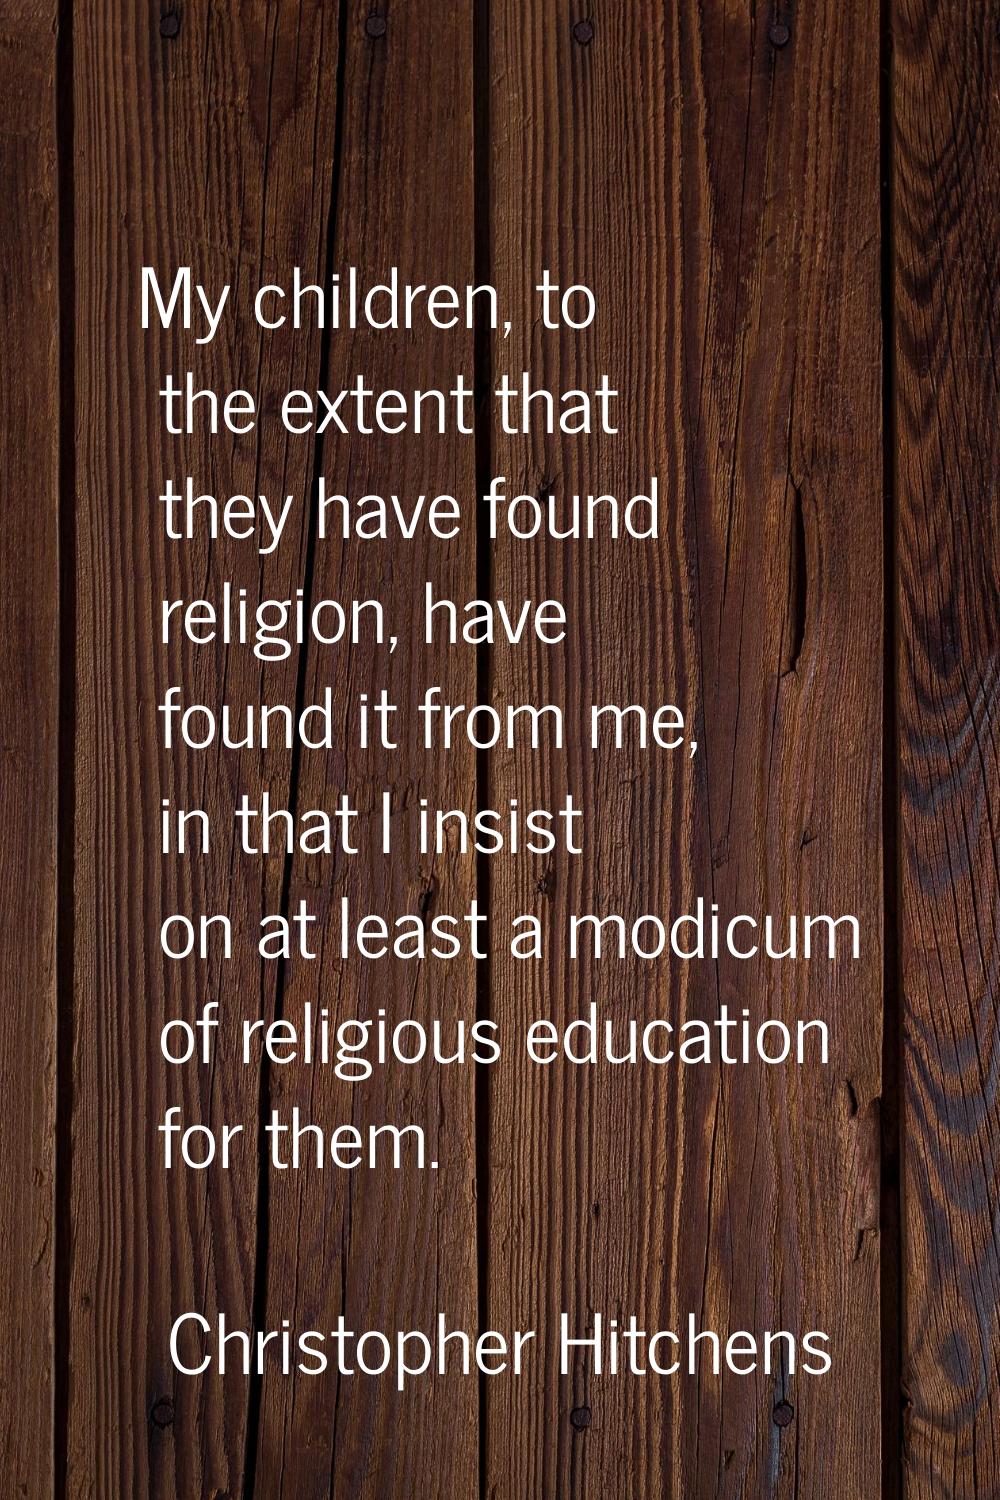 My children, to the extent that they have found religion, have found it from me, in that I insist o